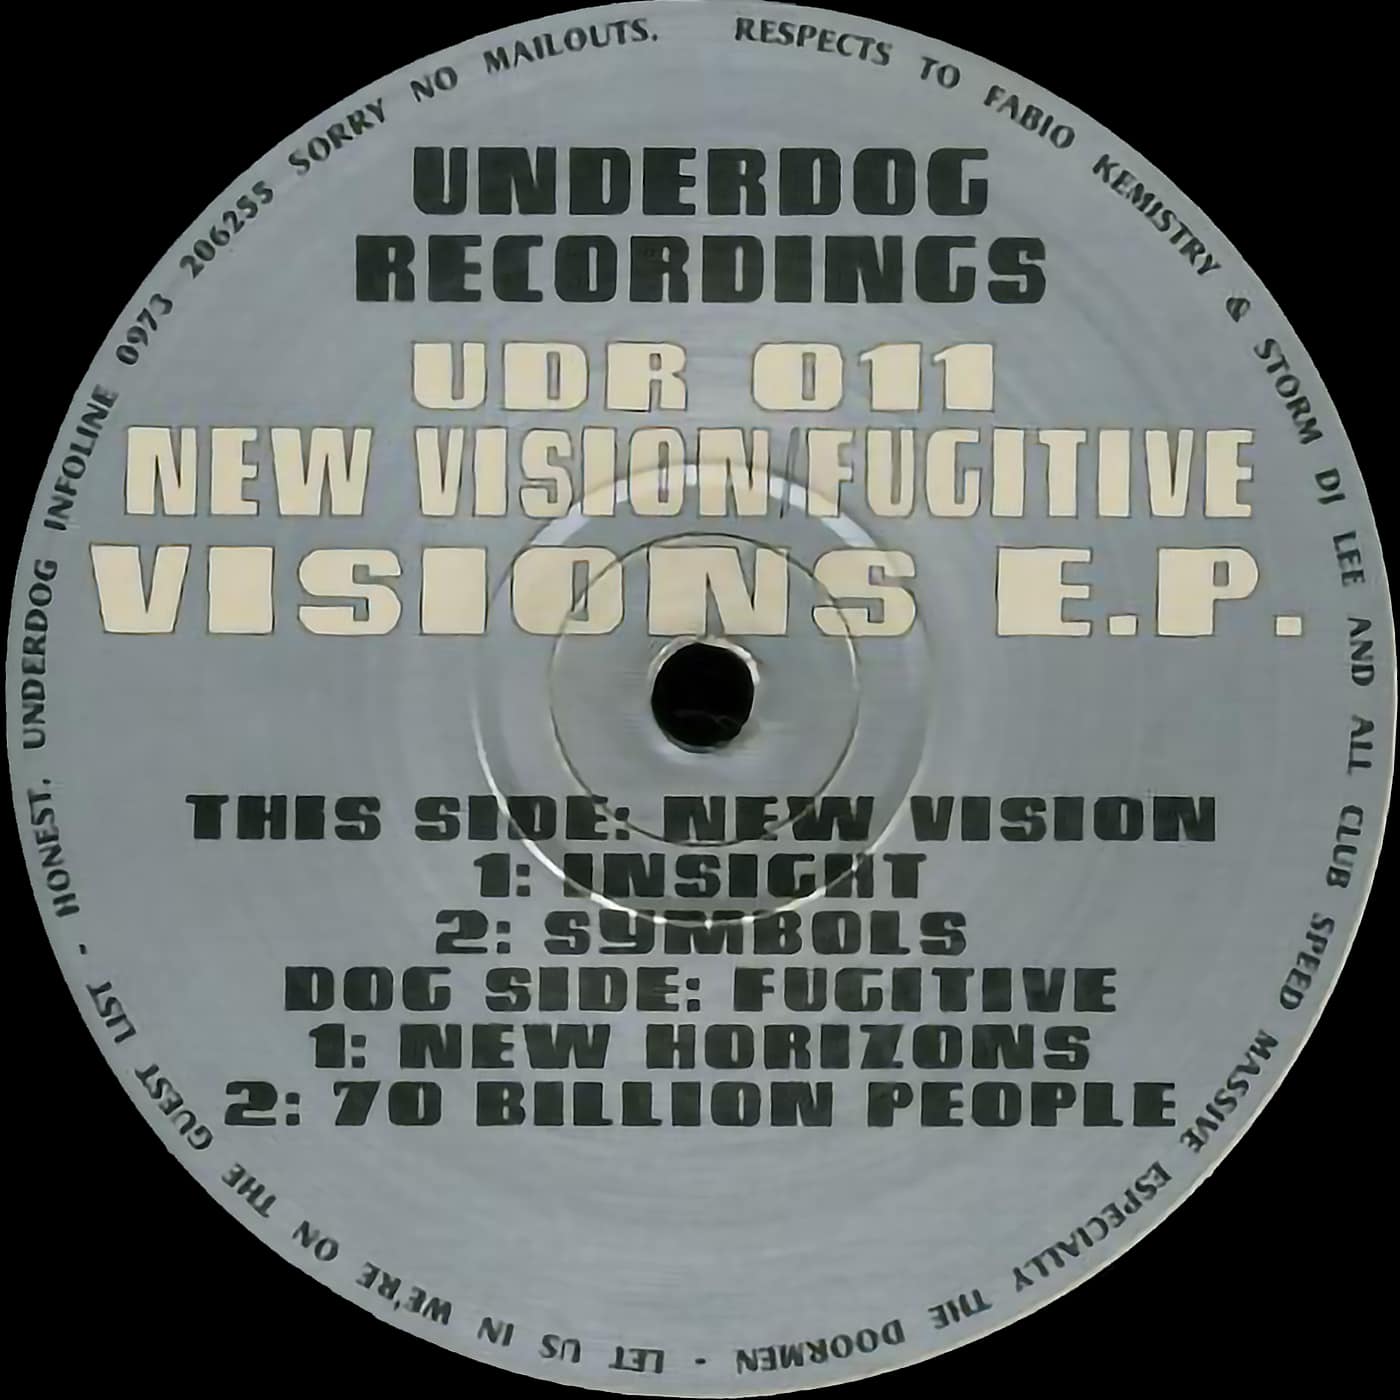 Download New Vision, Fugitive - Visions E.P. on Electrobuzz